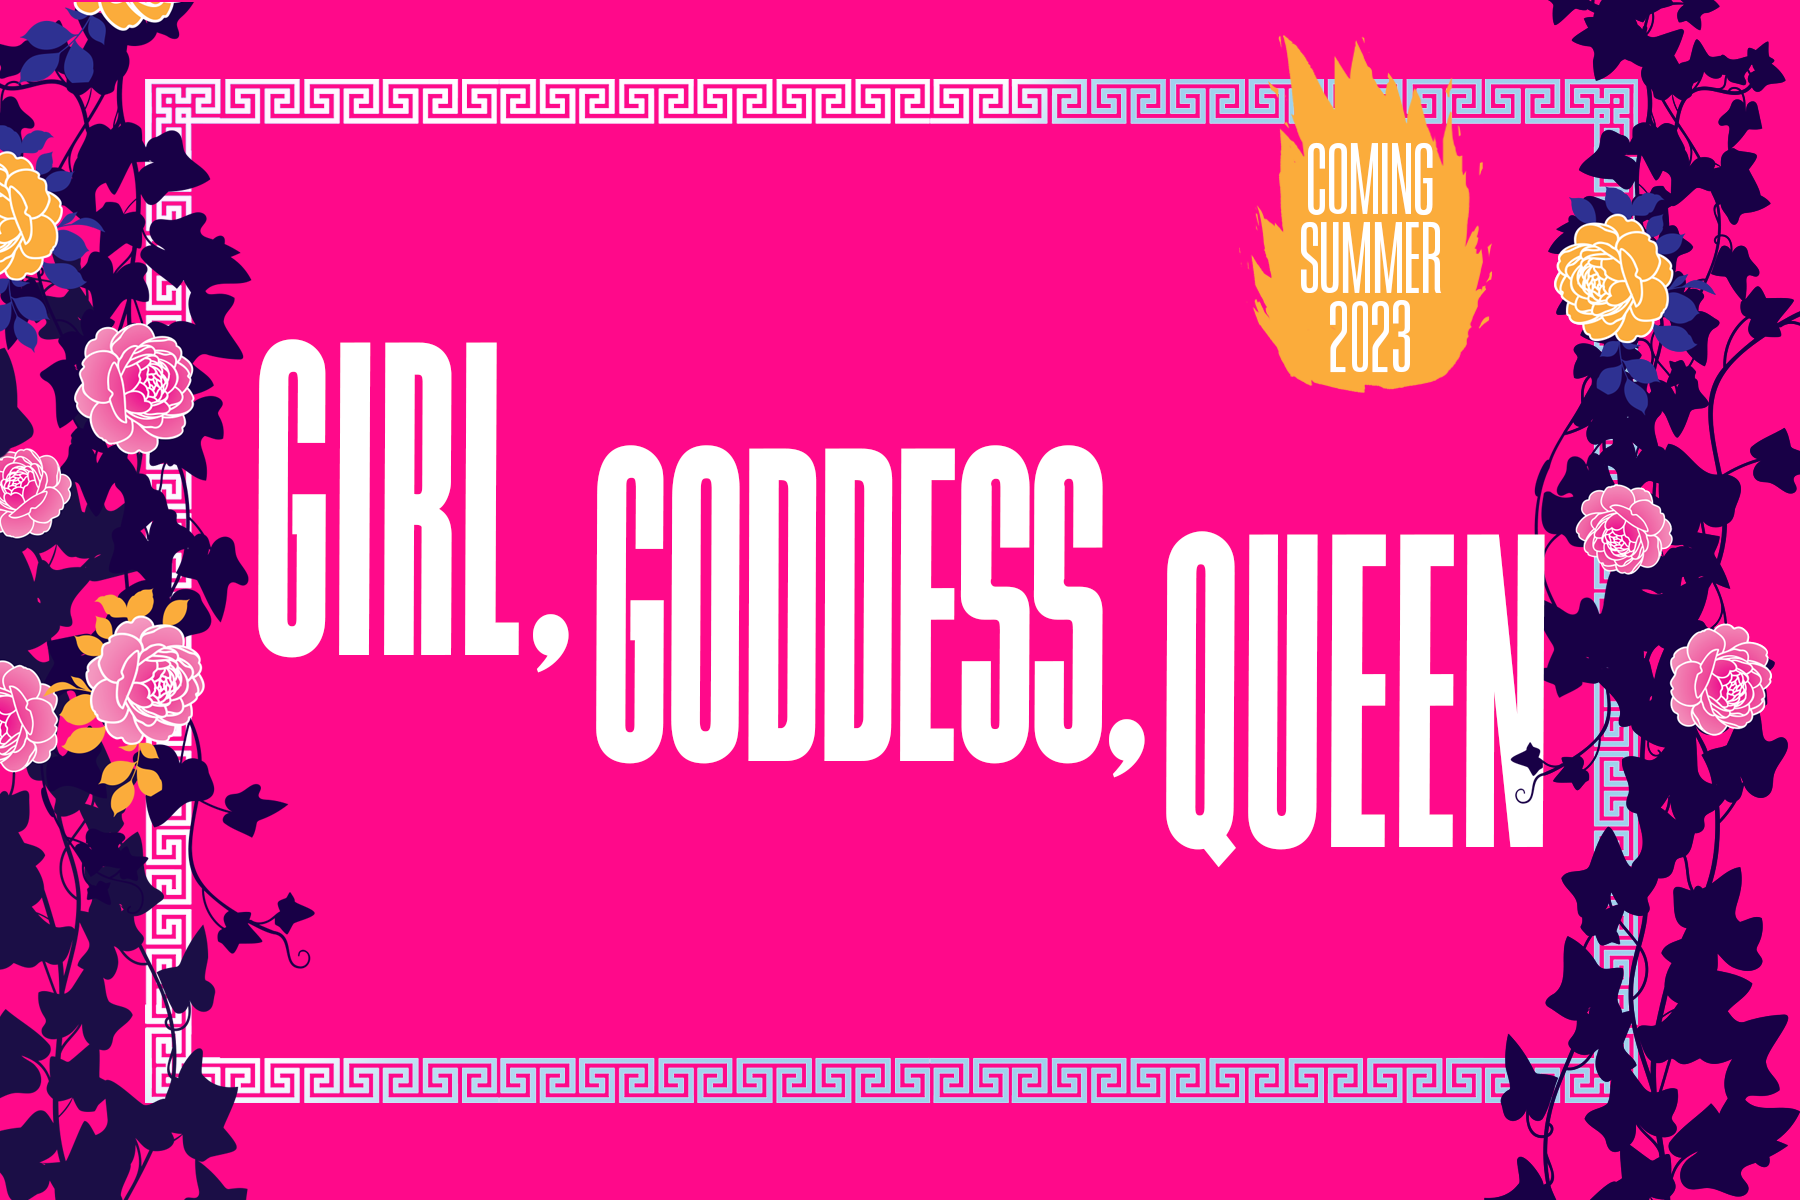 An image showing the title 'Girl, Goddess, Queen' in white typography on a bright pink background. Around the border are illustrated peonies and a greek key border. In the right hand corner is an orange flame roundel with the message 'Coming summer 2023' in white writing